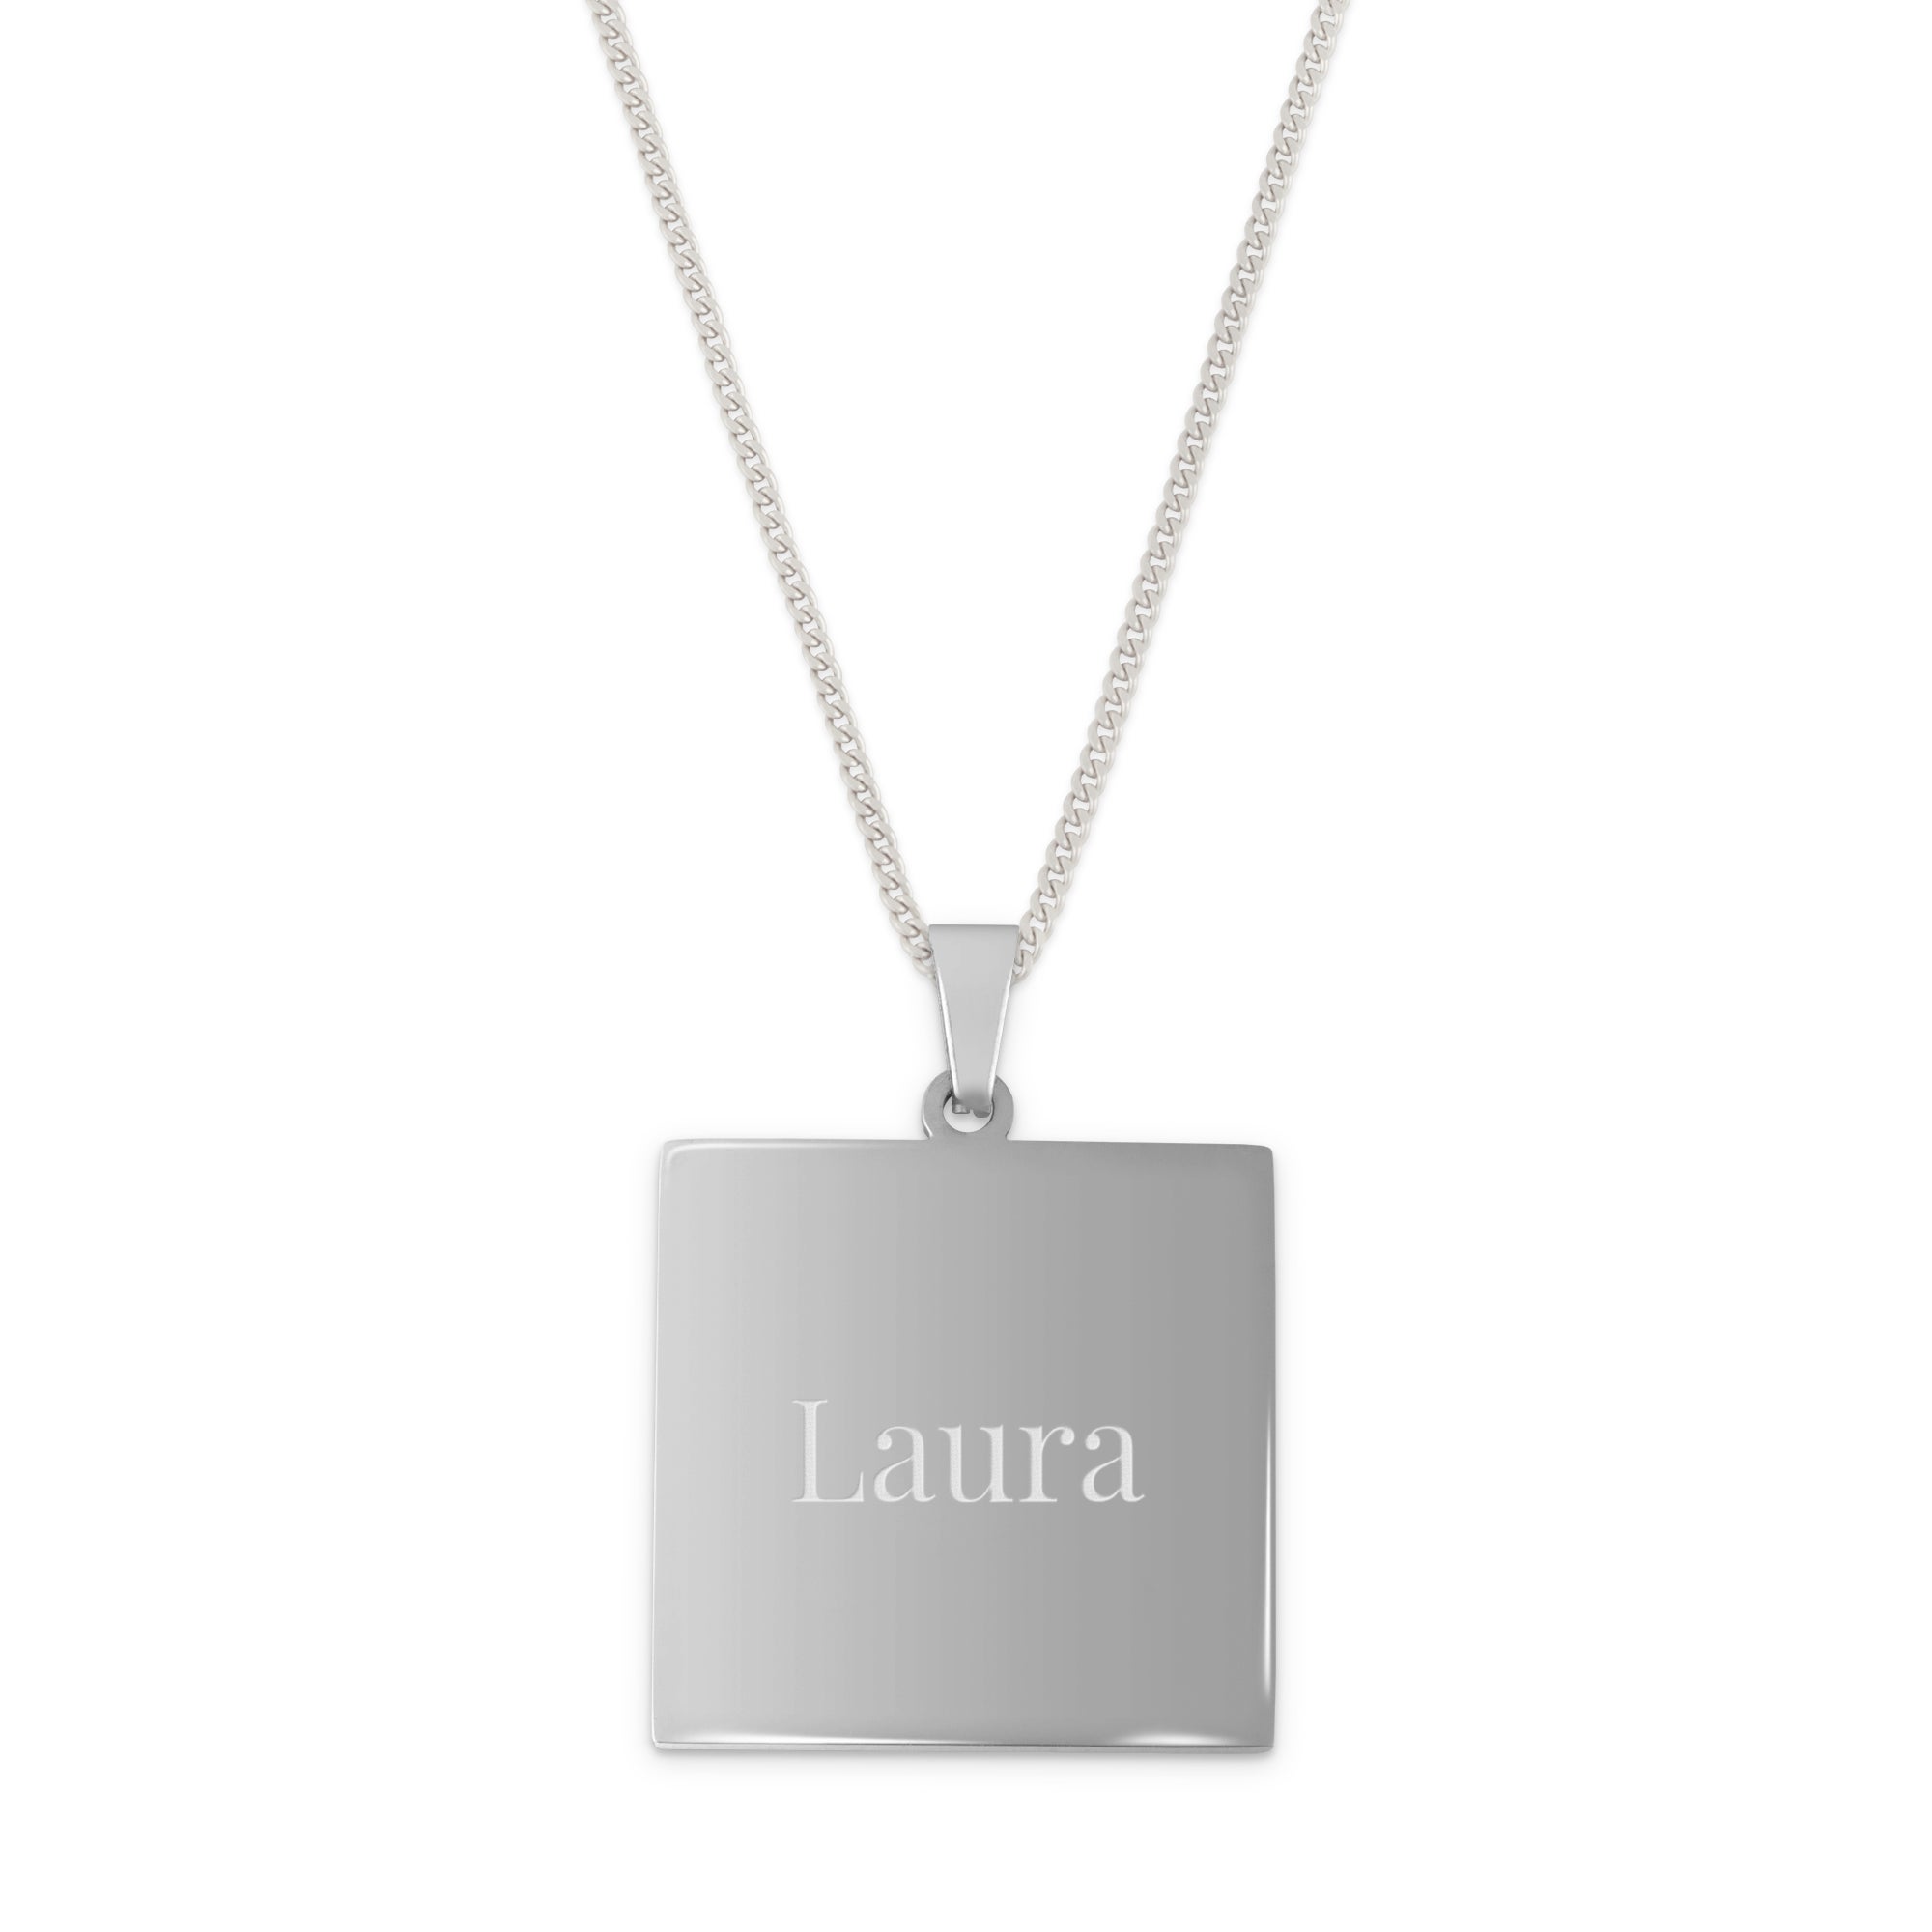 Necklace square pendant with name - silver